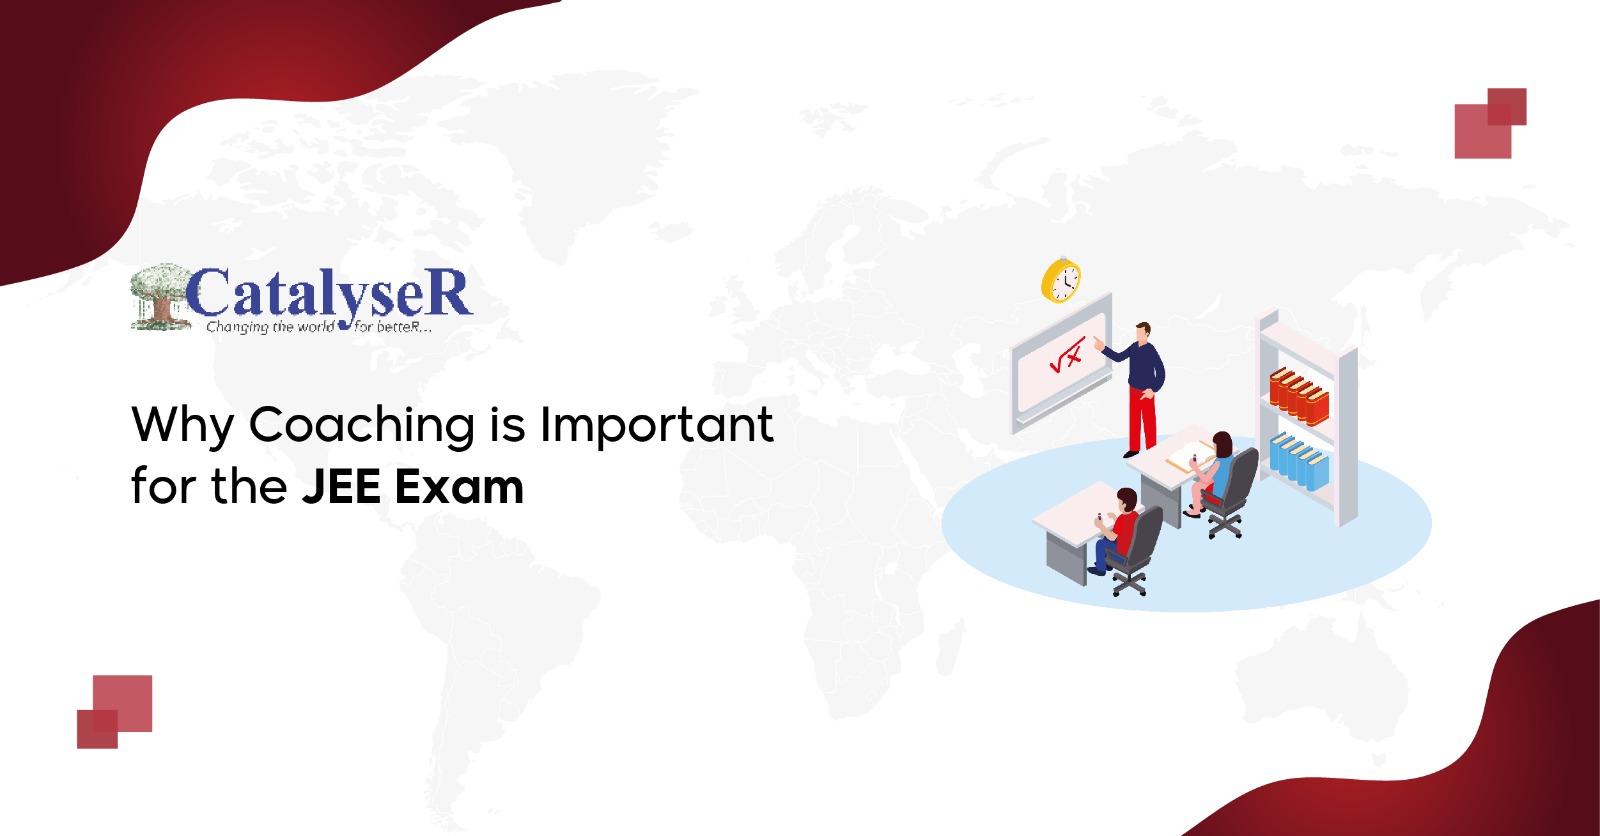 Why Coaching is Important for the JEE Exam